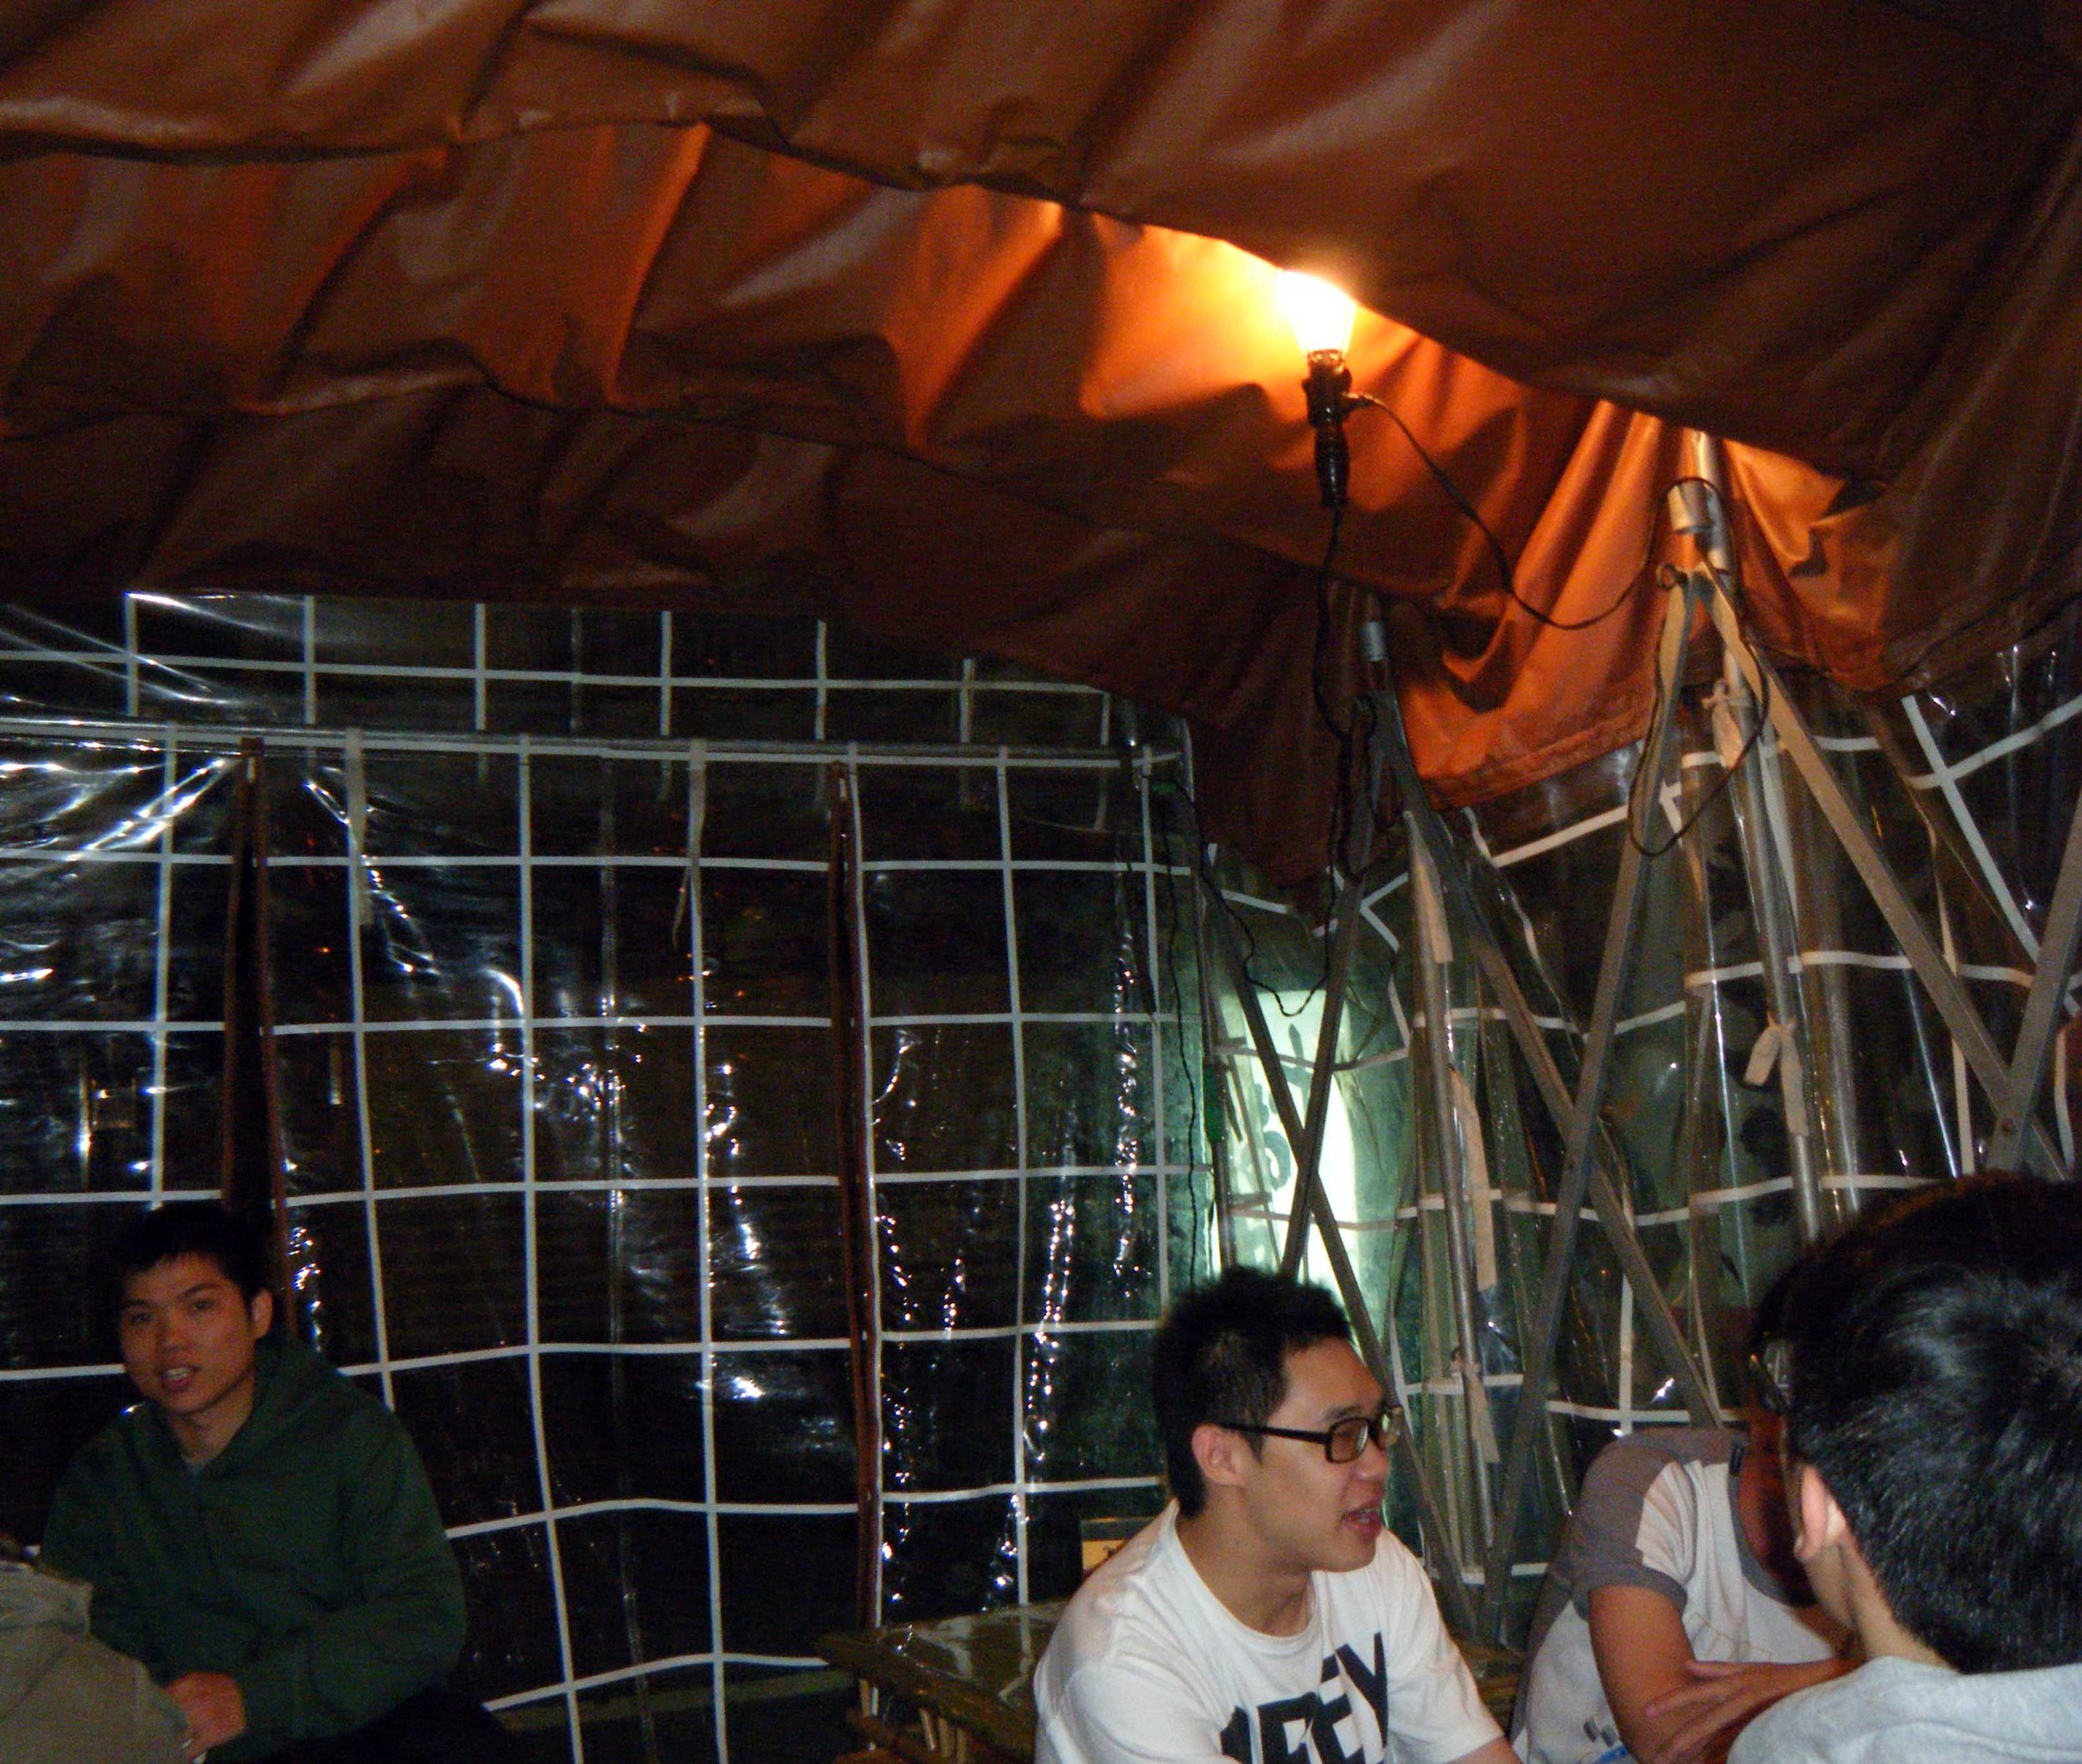 Tainan party tent 10-28-10.jpg